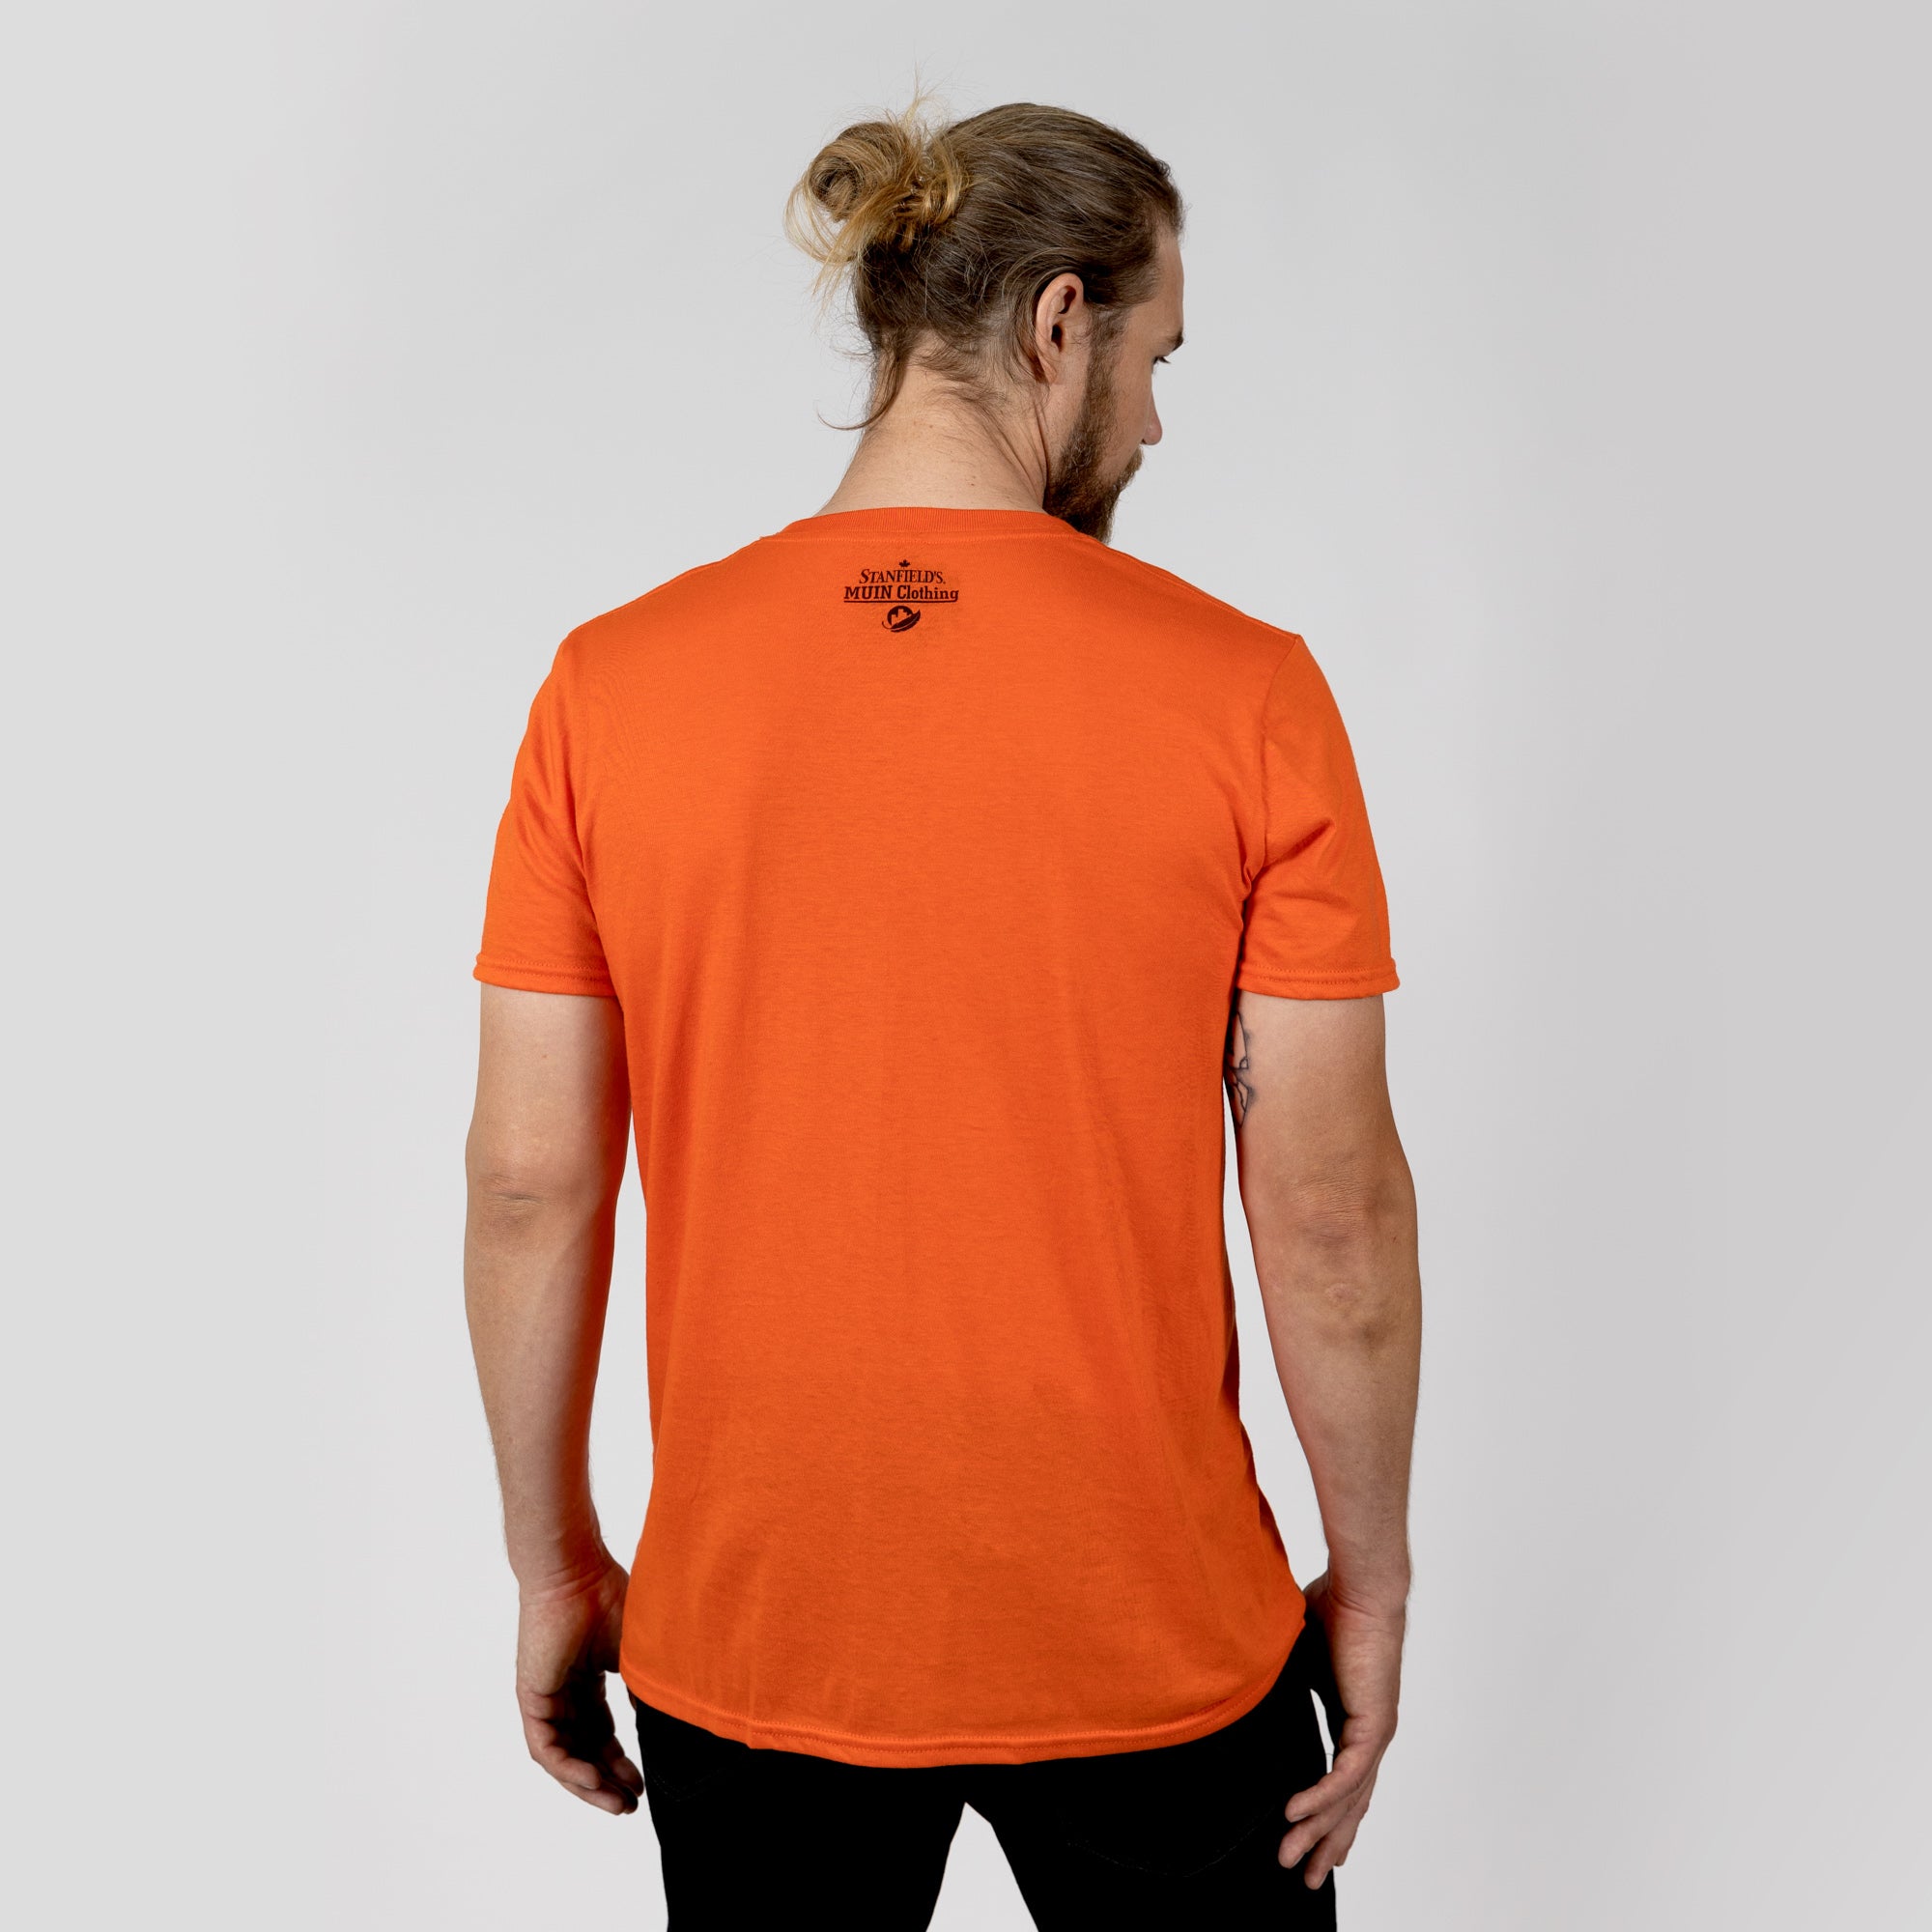 Muin X Stanfield's Adult Orange T-Shirt - NATIONAL DAY FOR TRUTH AND RECONCILIATION "QUILL"